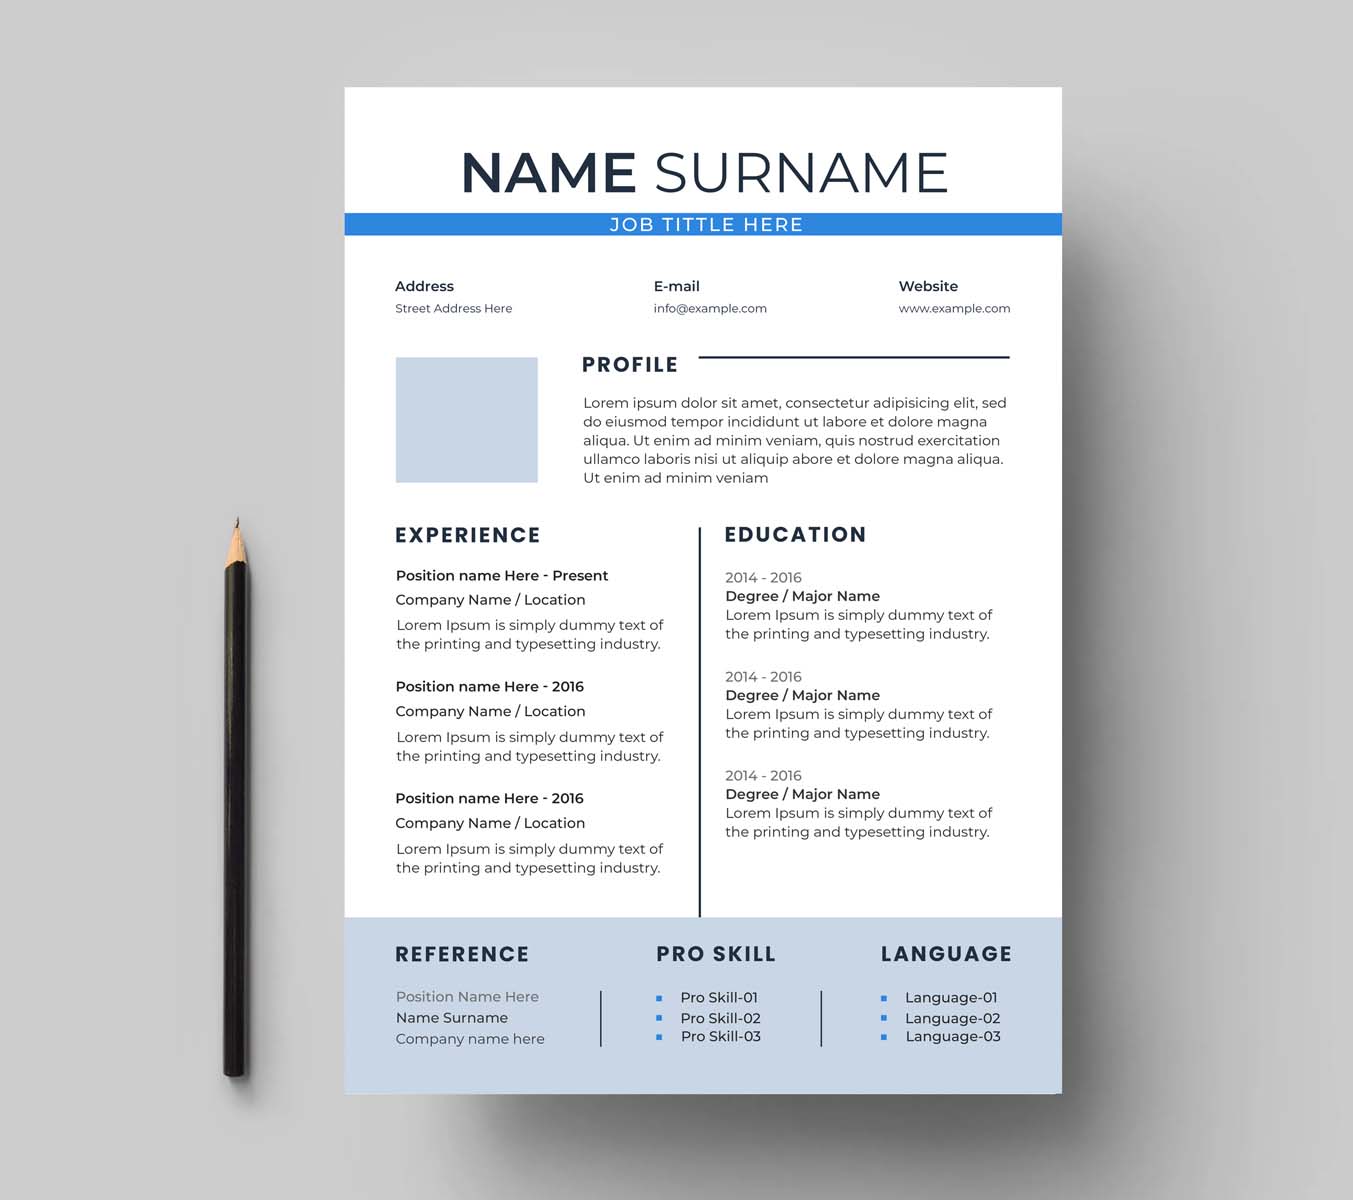 Blue and white resume template with a pencil.